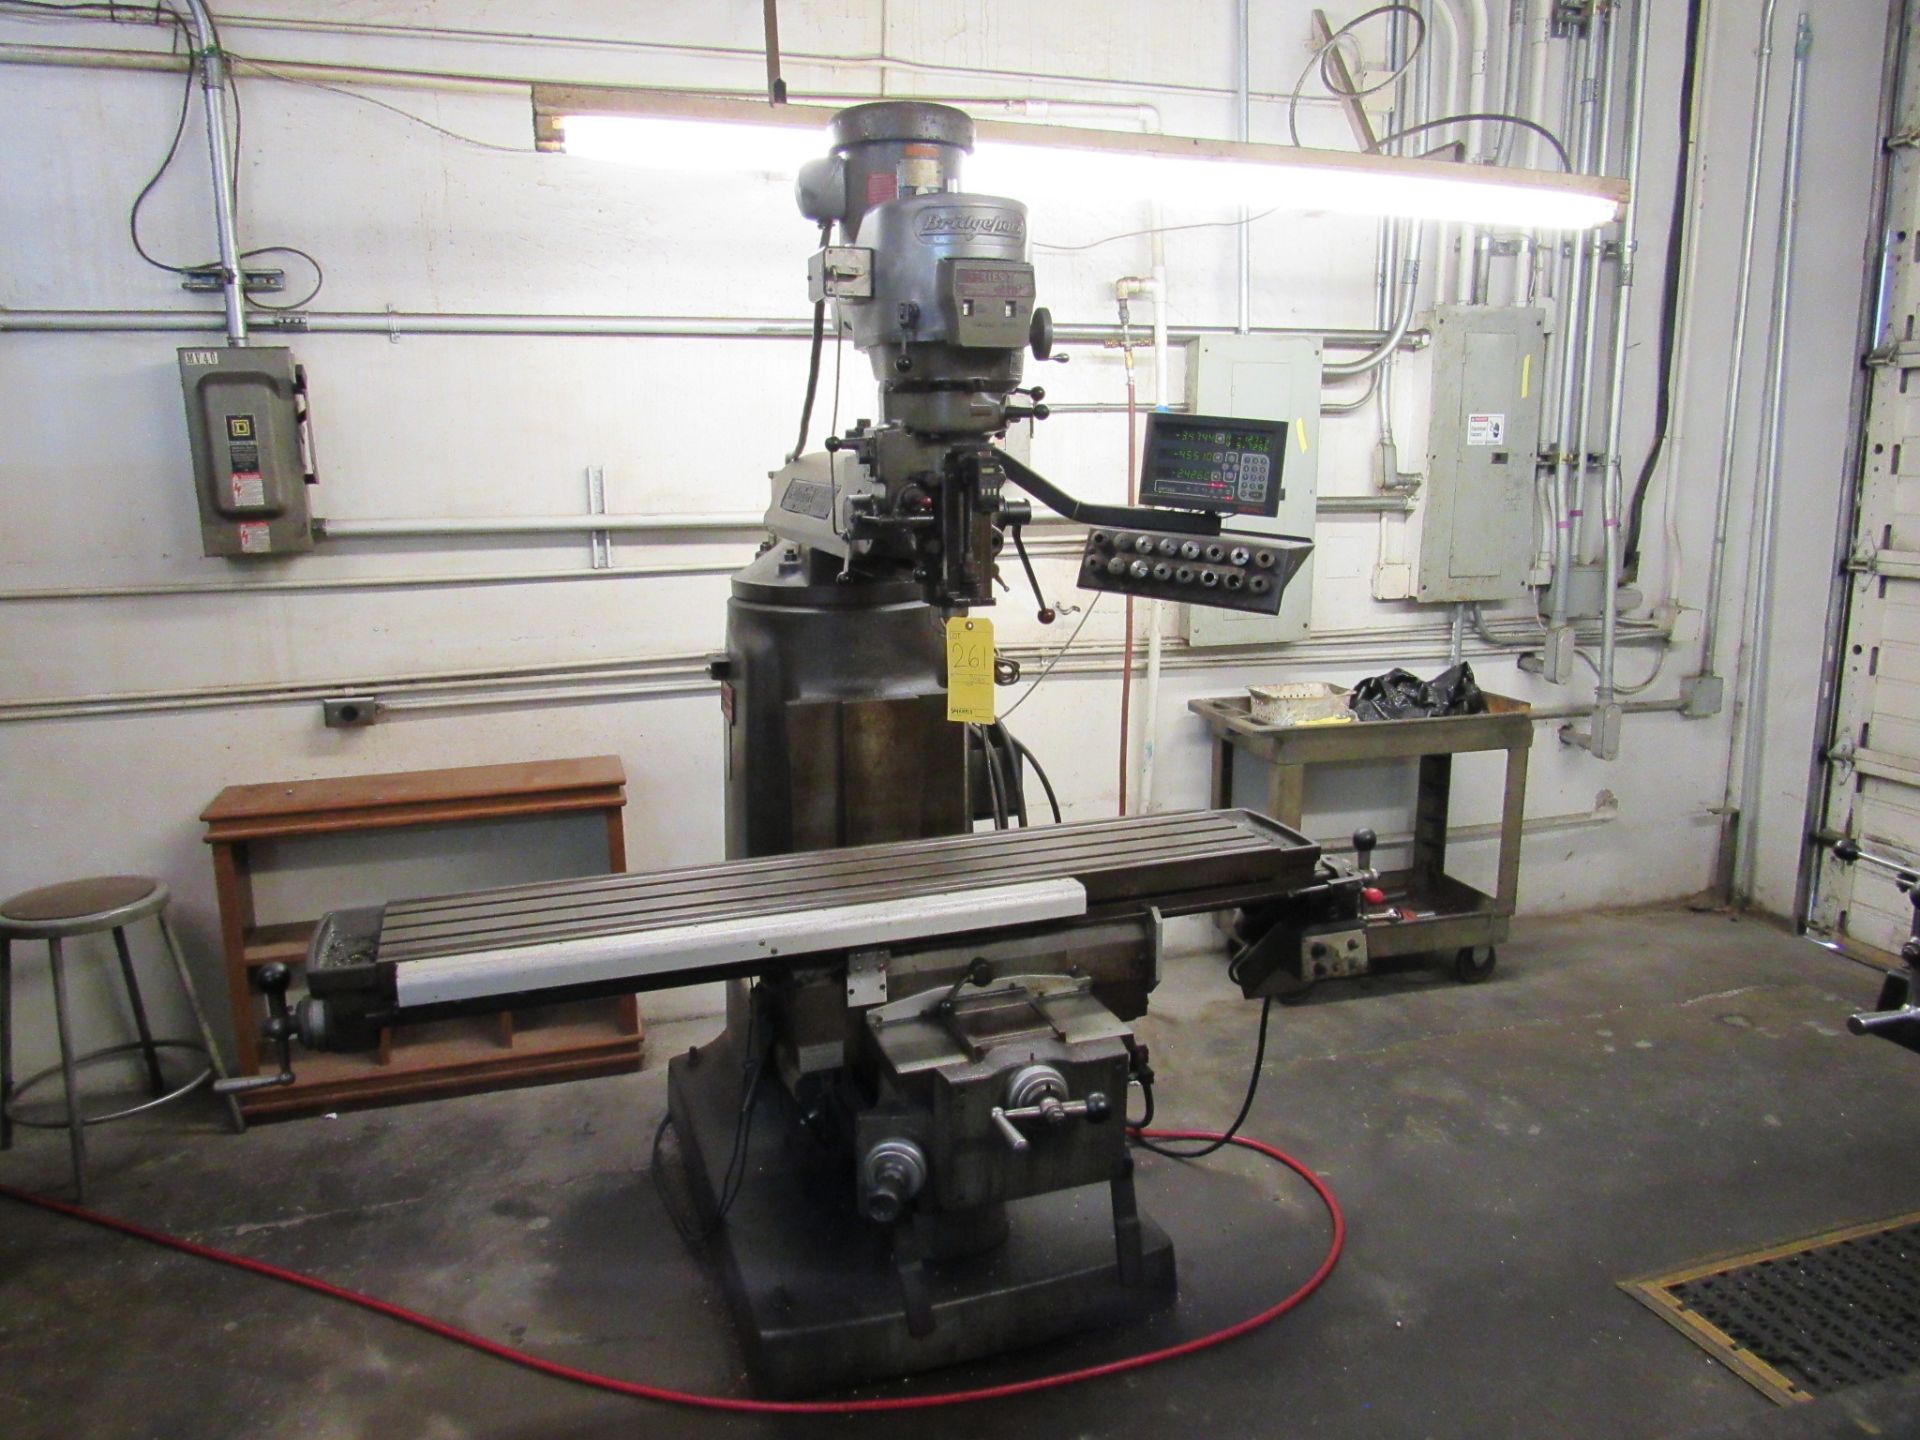 10" x 54" Bridgeport Series II Special Vertical Milling Machine, 10” x 54” table, Newall 3-axis DRO, - Image 5 of 11